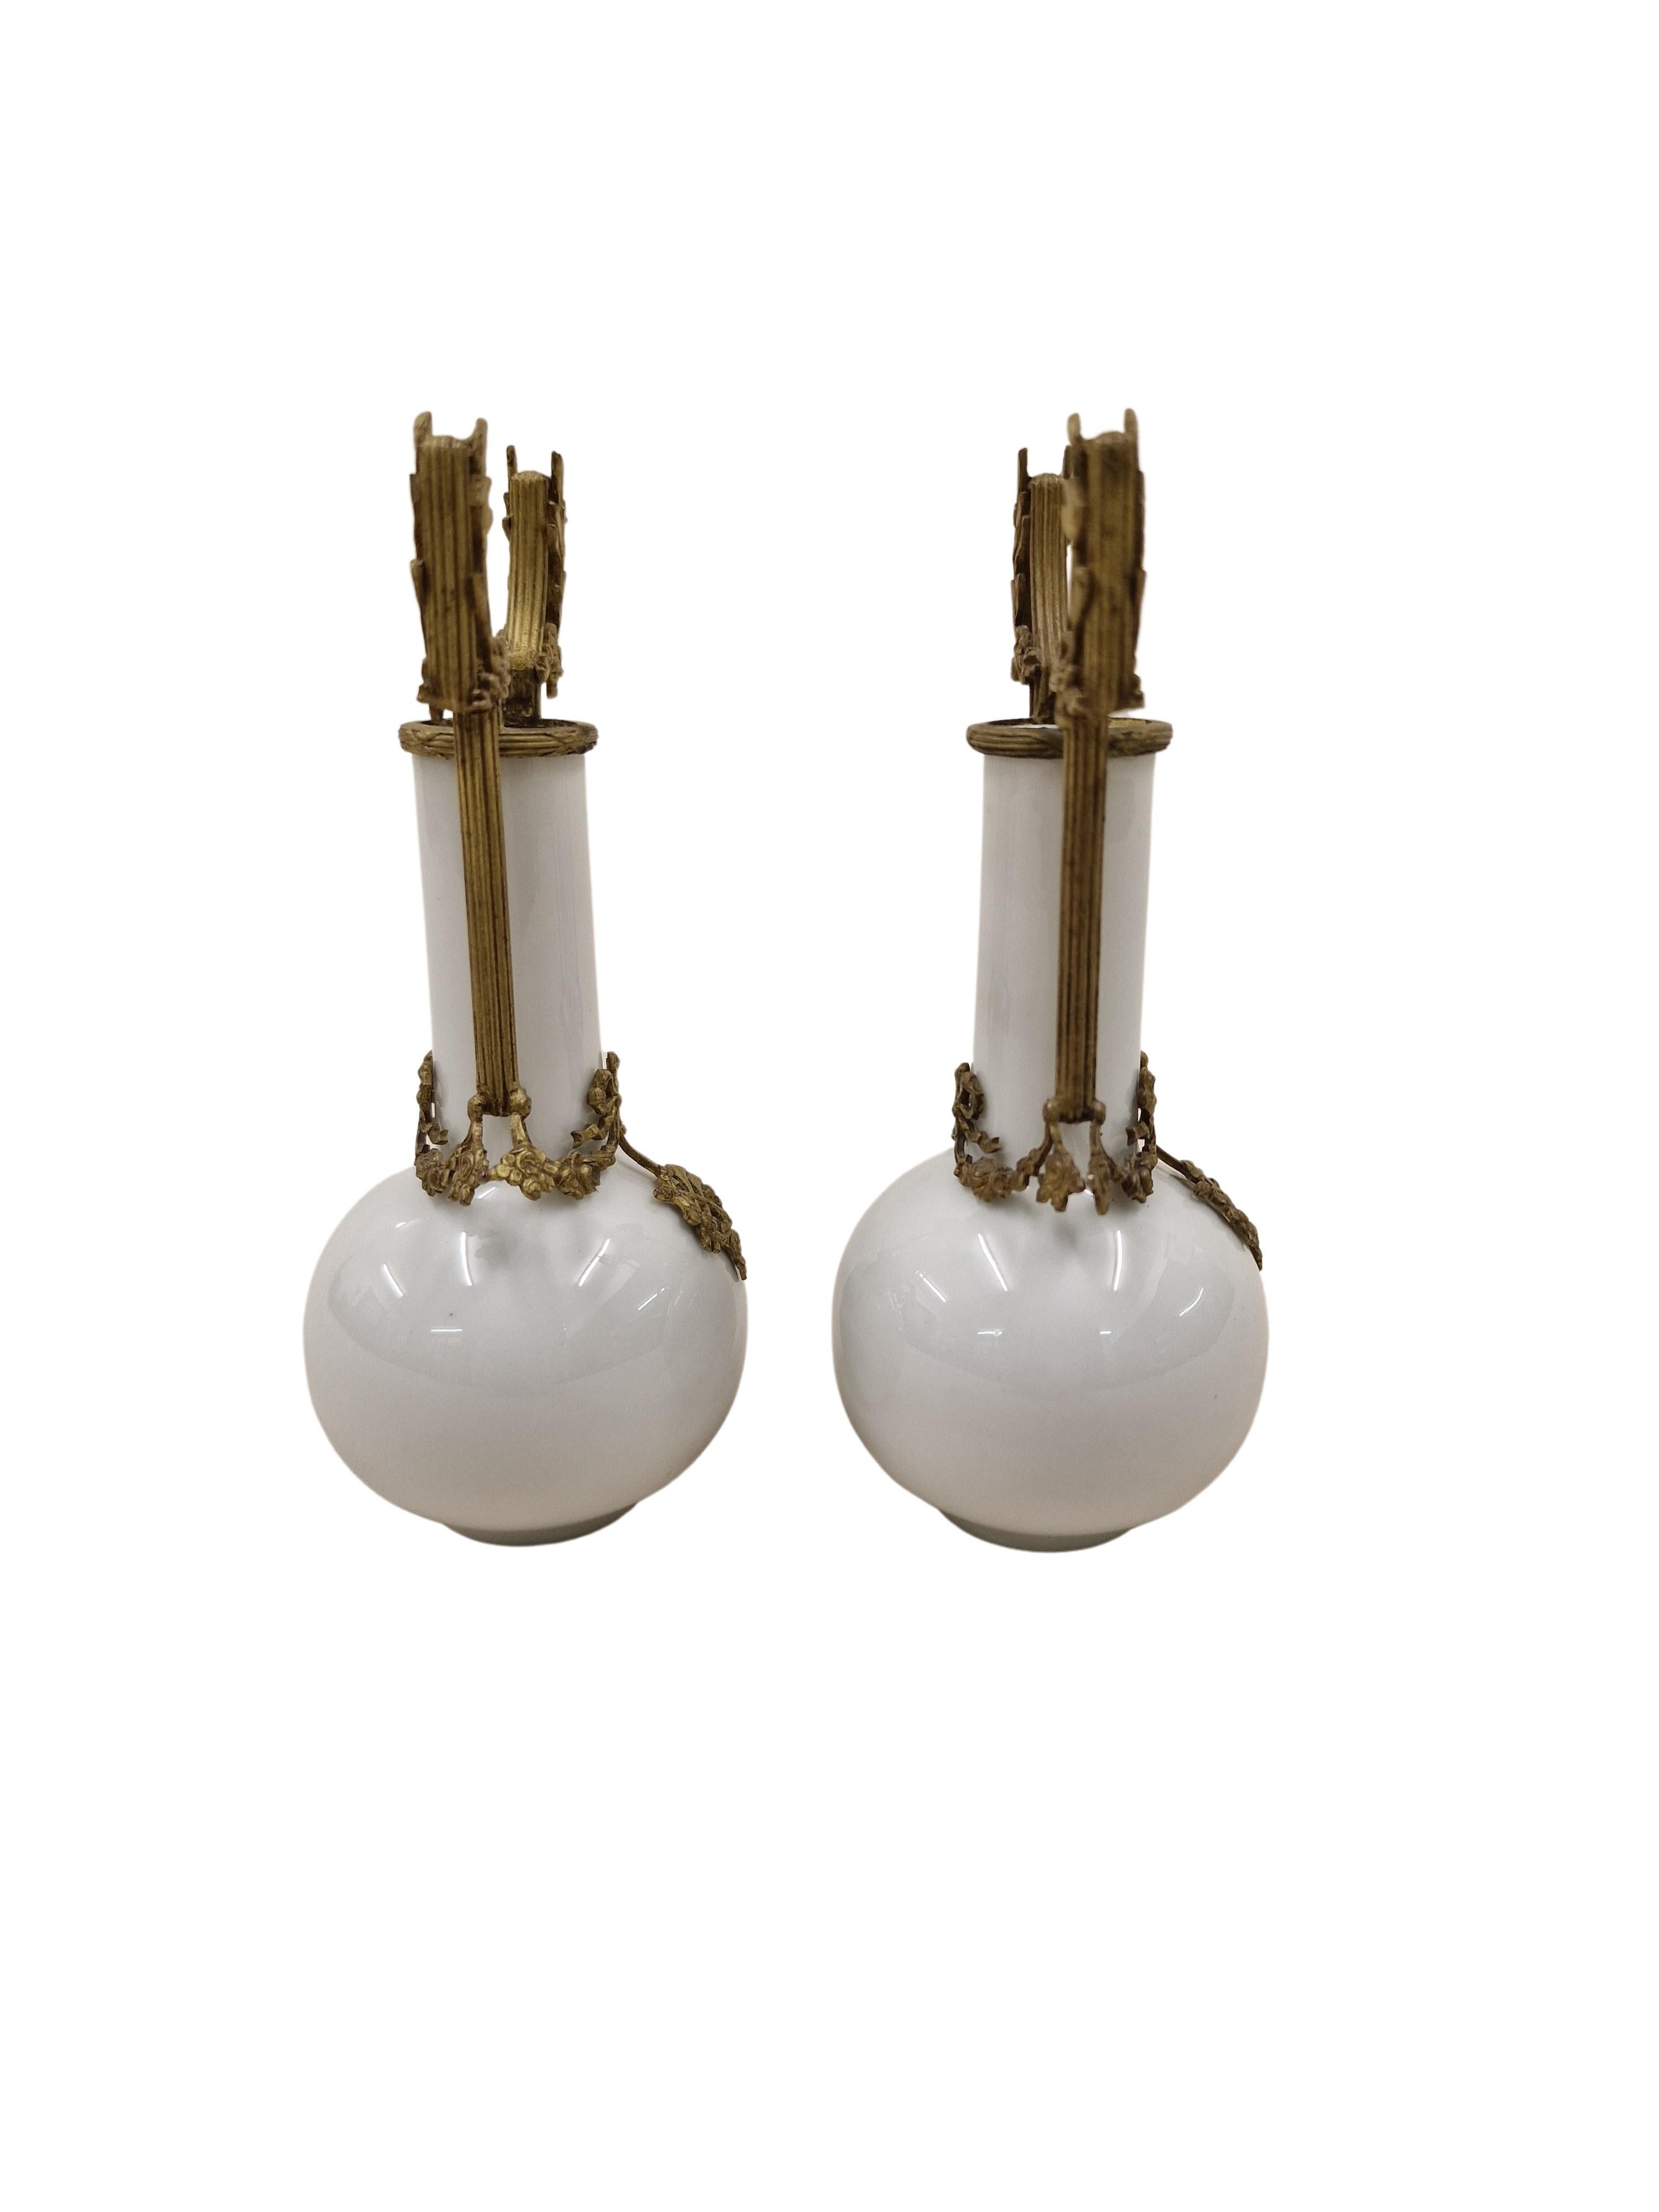 Outstanding pair of porcelain vases, so-called miniature vases, made around 1880-1900, late napoleon III, country of origin: France. These nice objects are out of white porcelain with particularly high quality bronze mounting. Every centimeter is